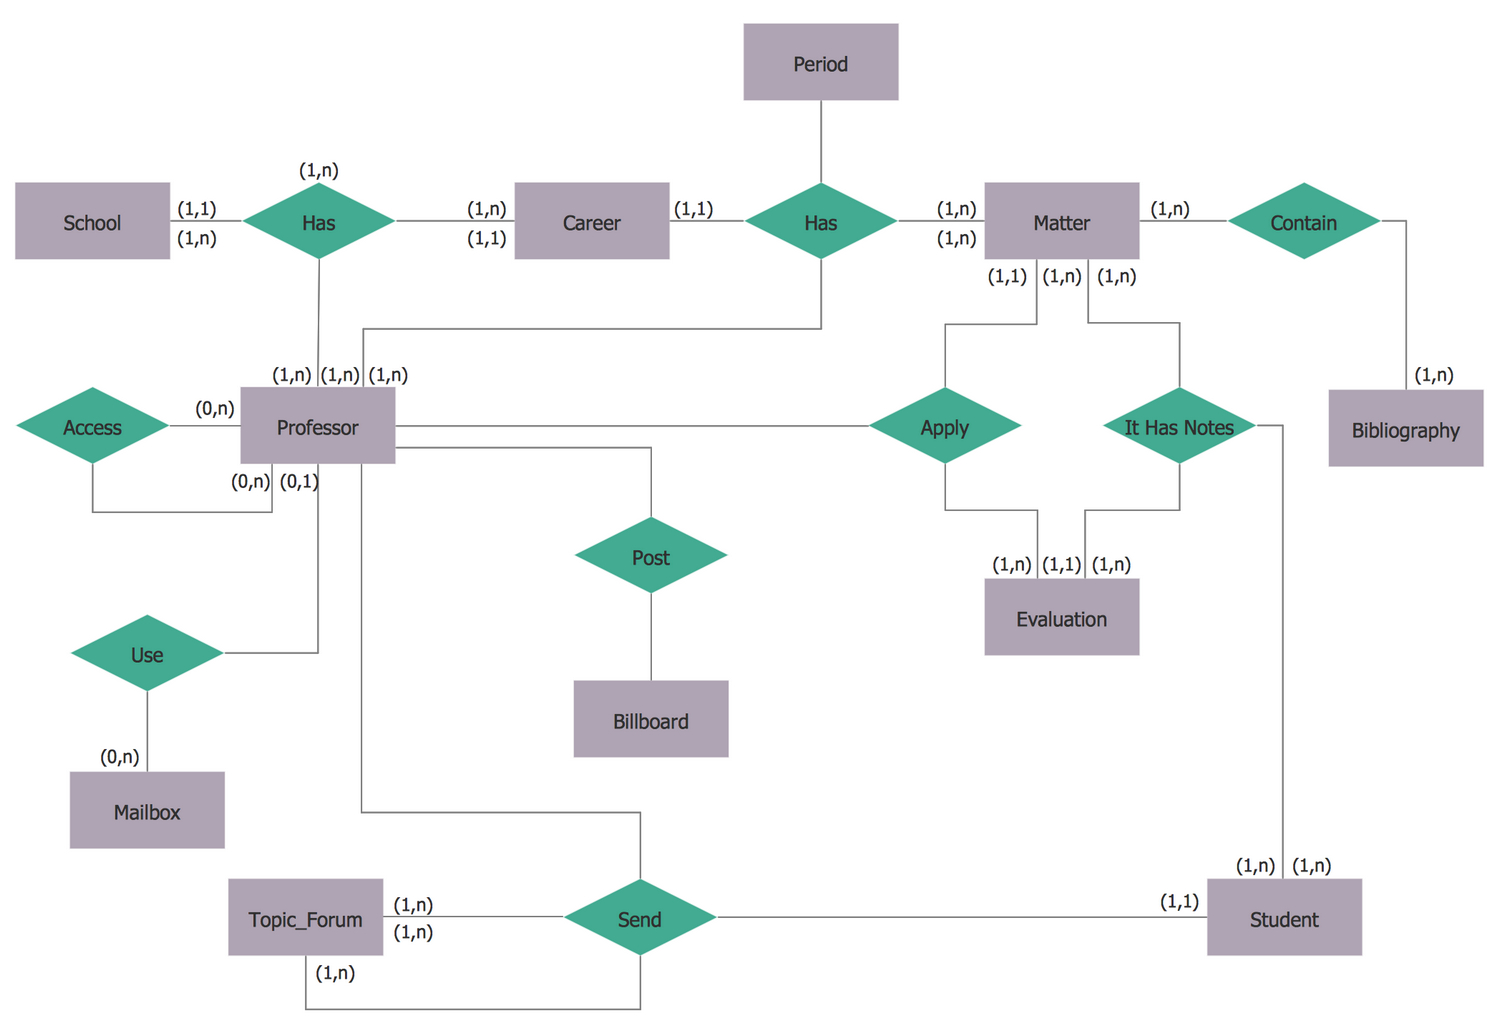 Entity Relationship Diagram (Erd) Solution | Conceptdraw pertaining to Er Diagram Questions And Answers Pdf